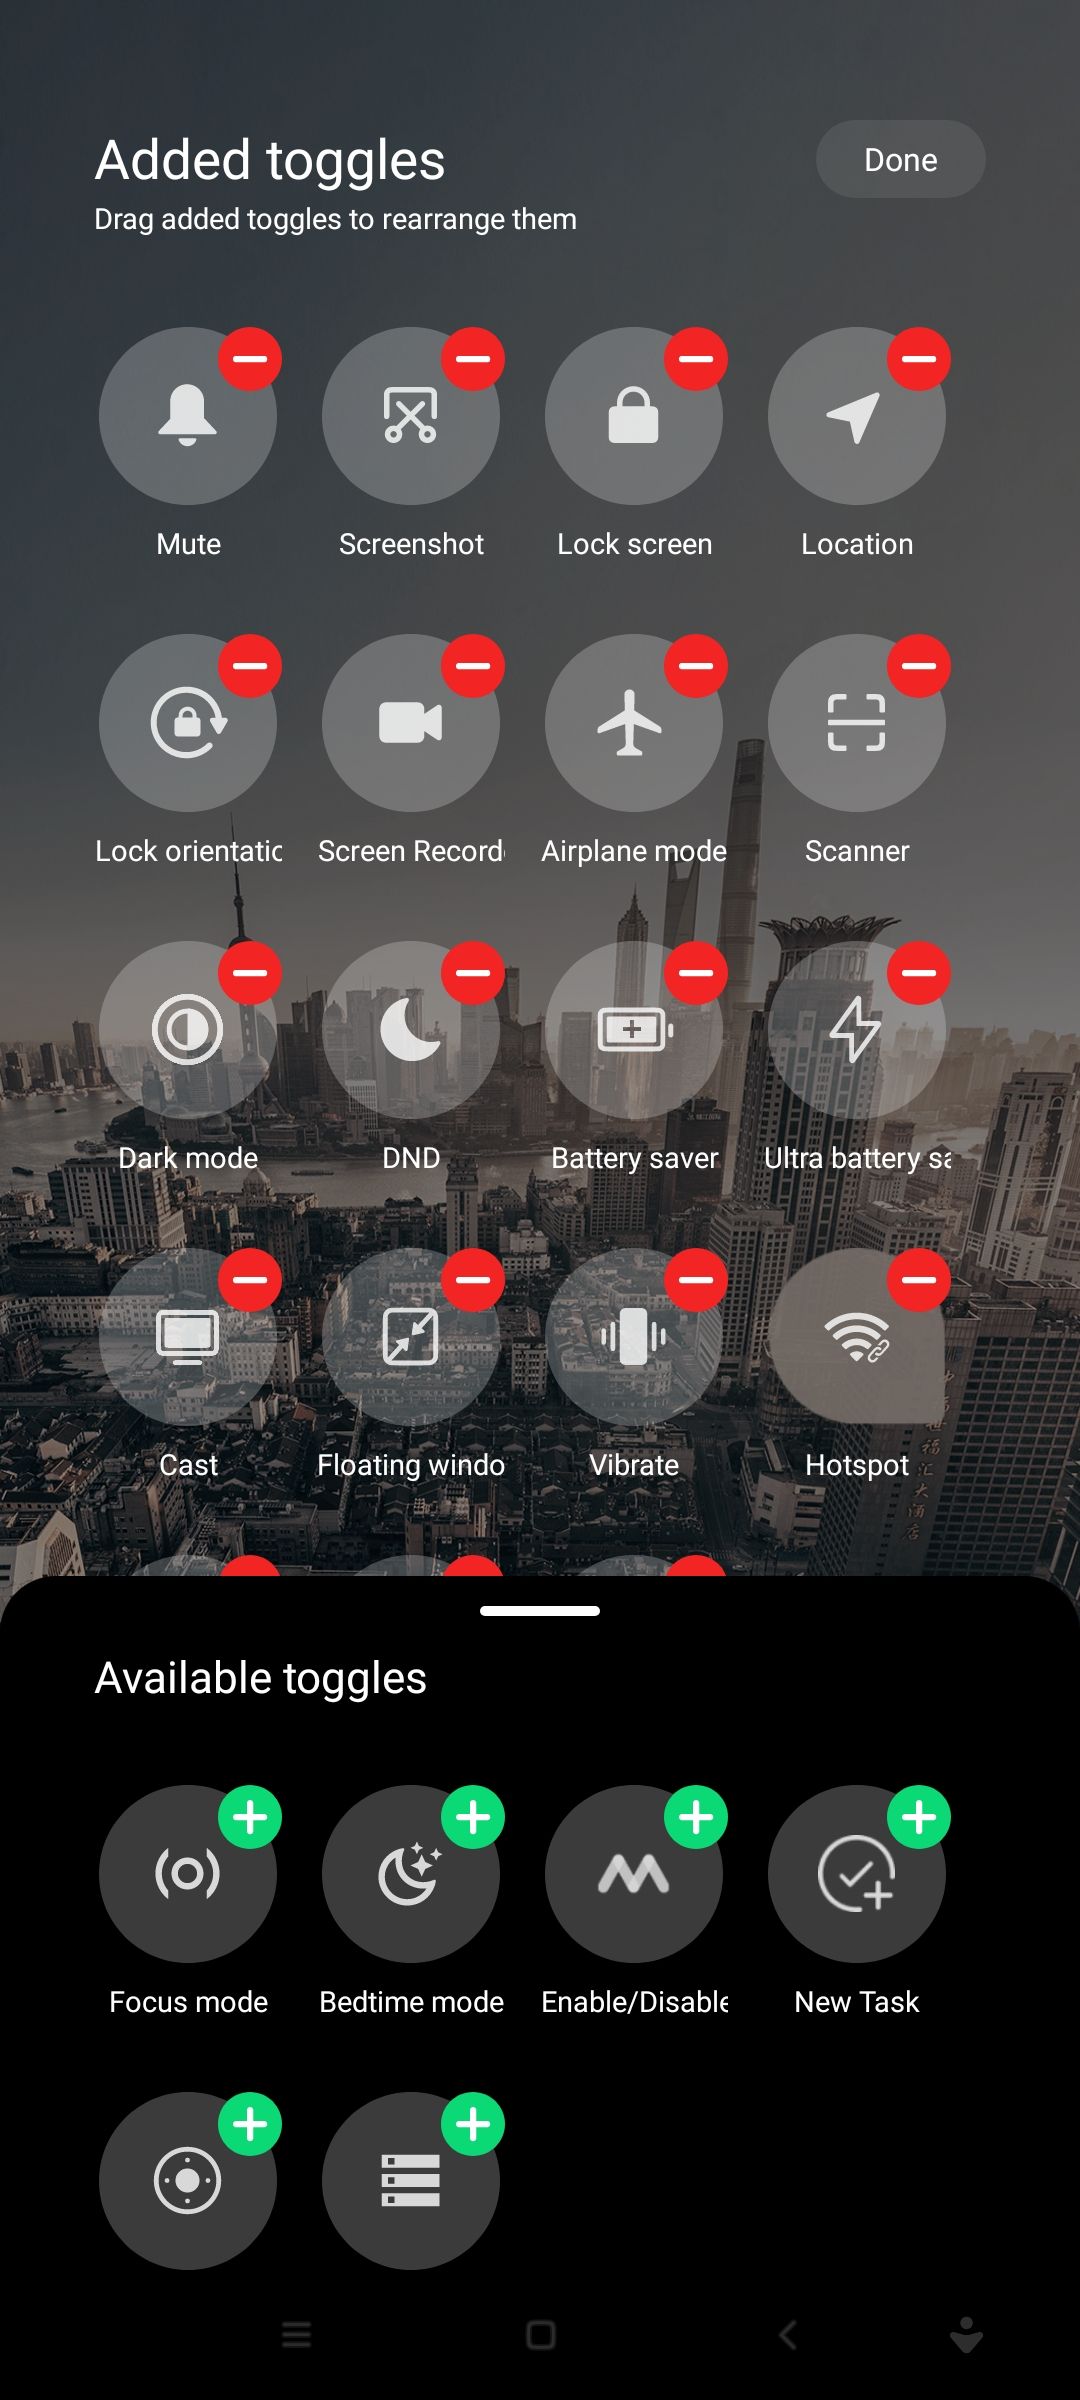 Available toggles in Android quick settings menu